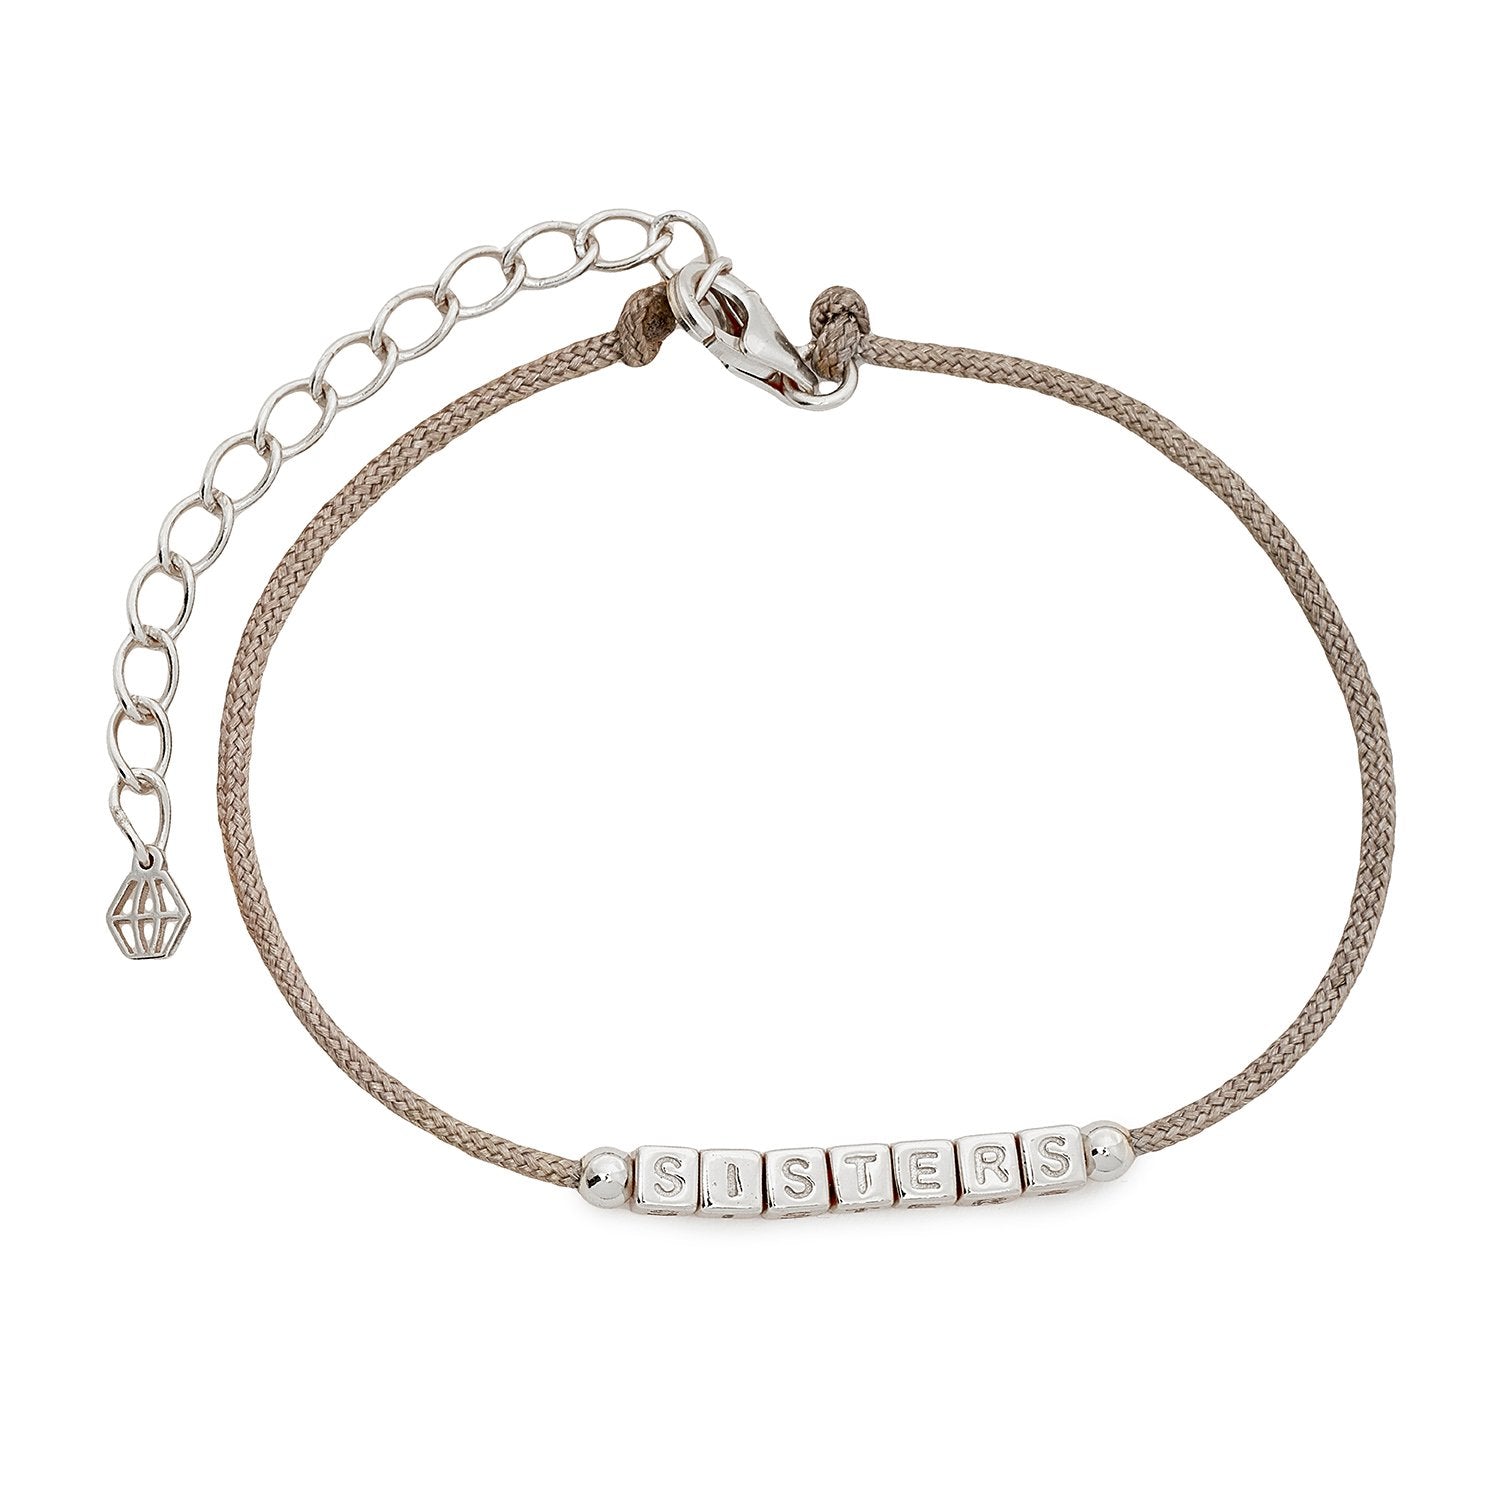 Little Words Project Refined Collection - Sisters Grey Cord Bracelet